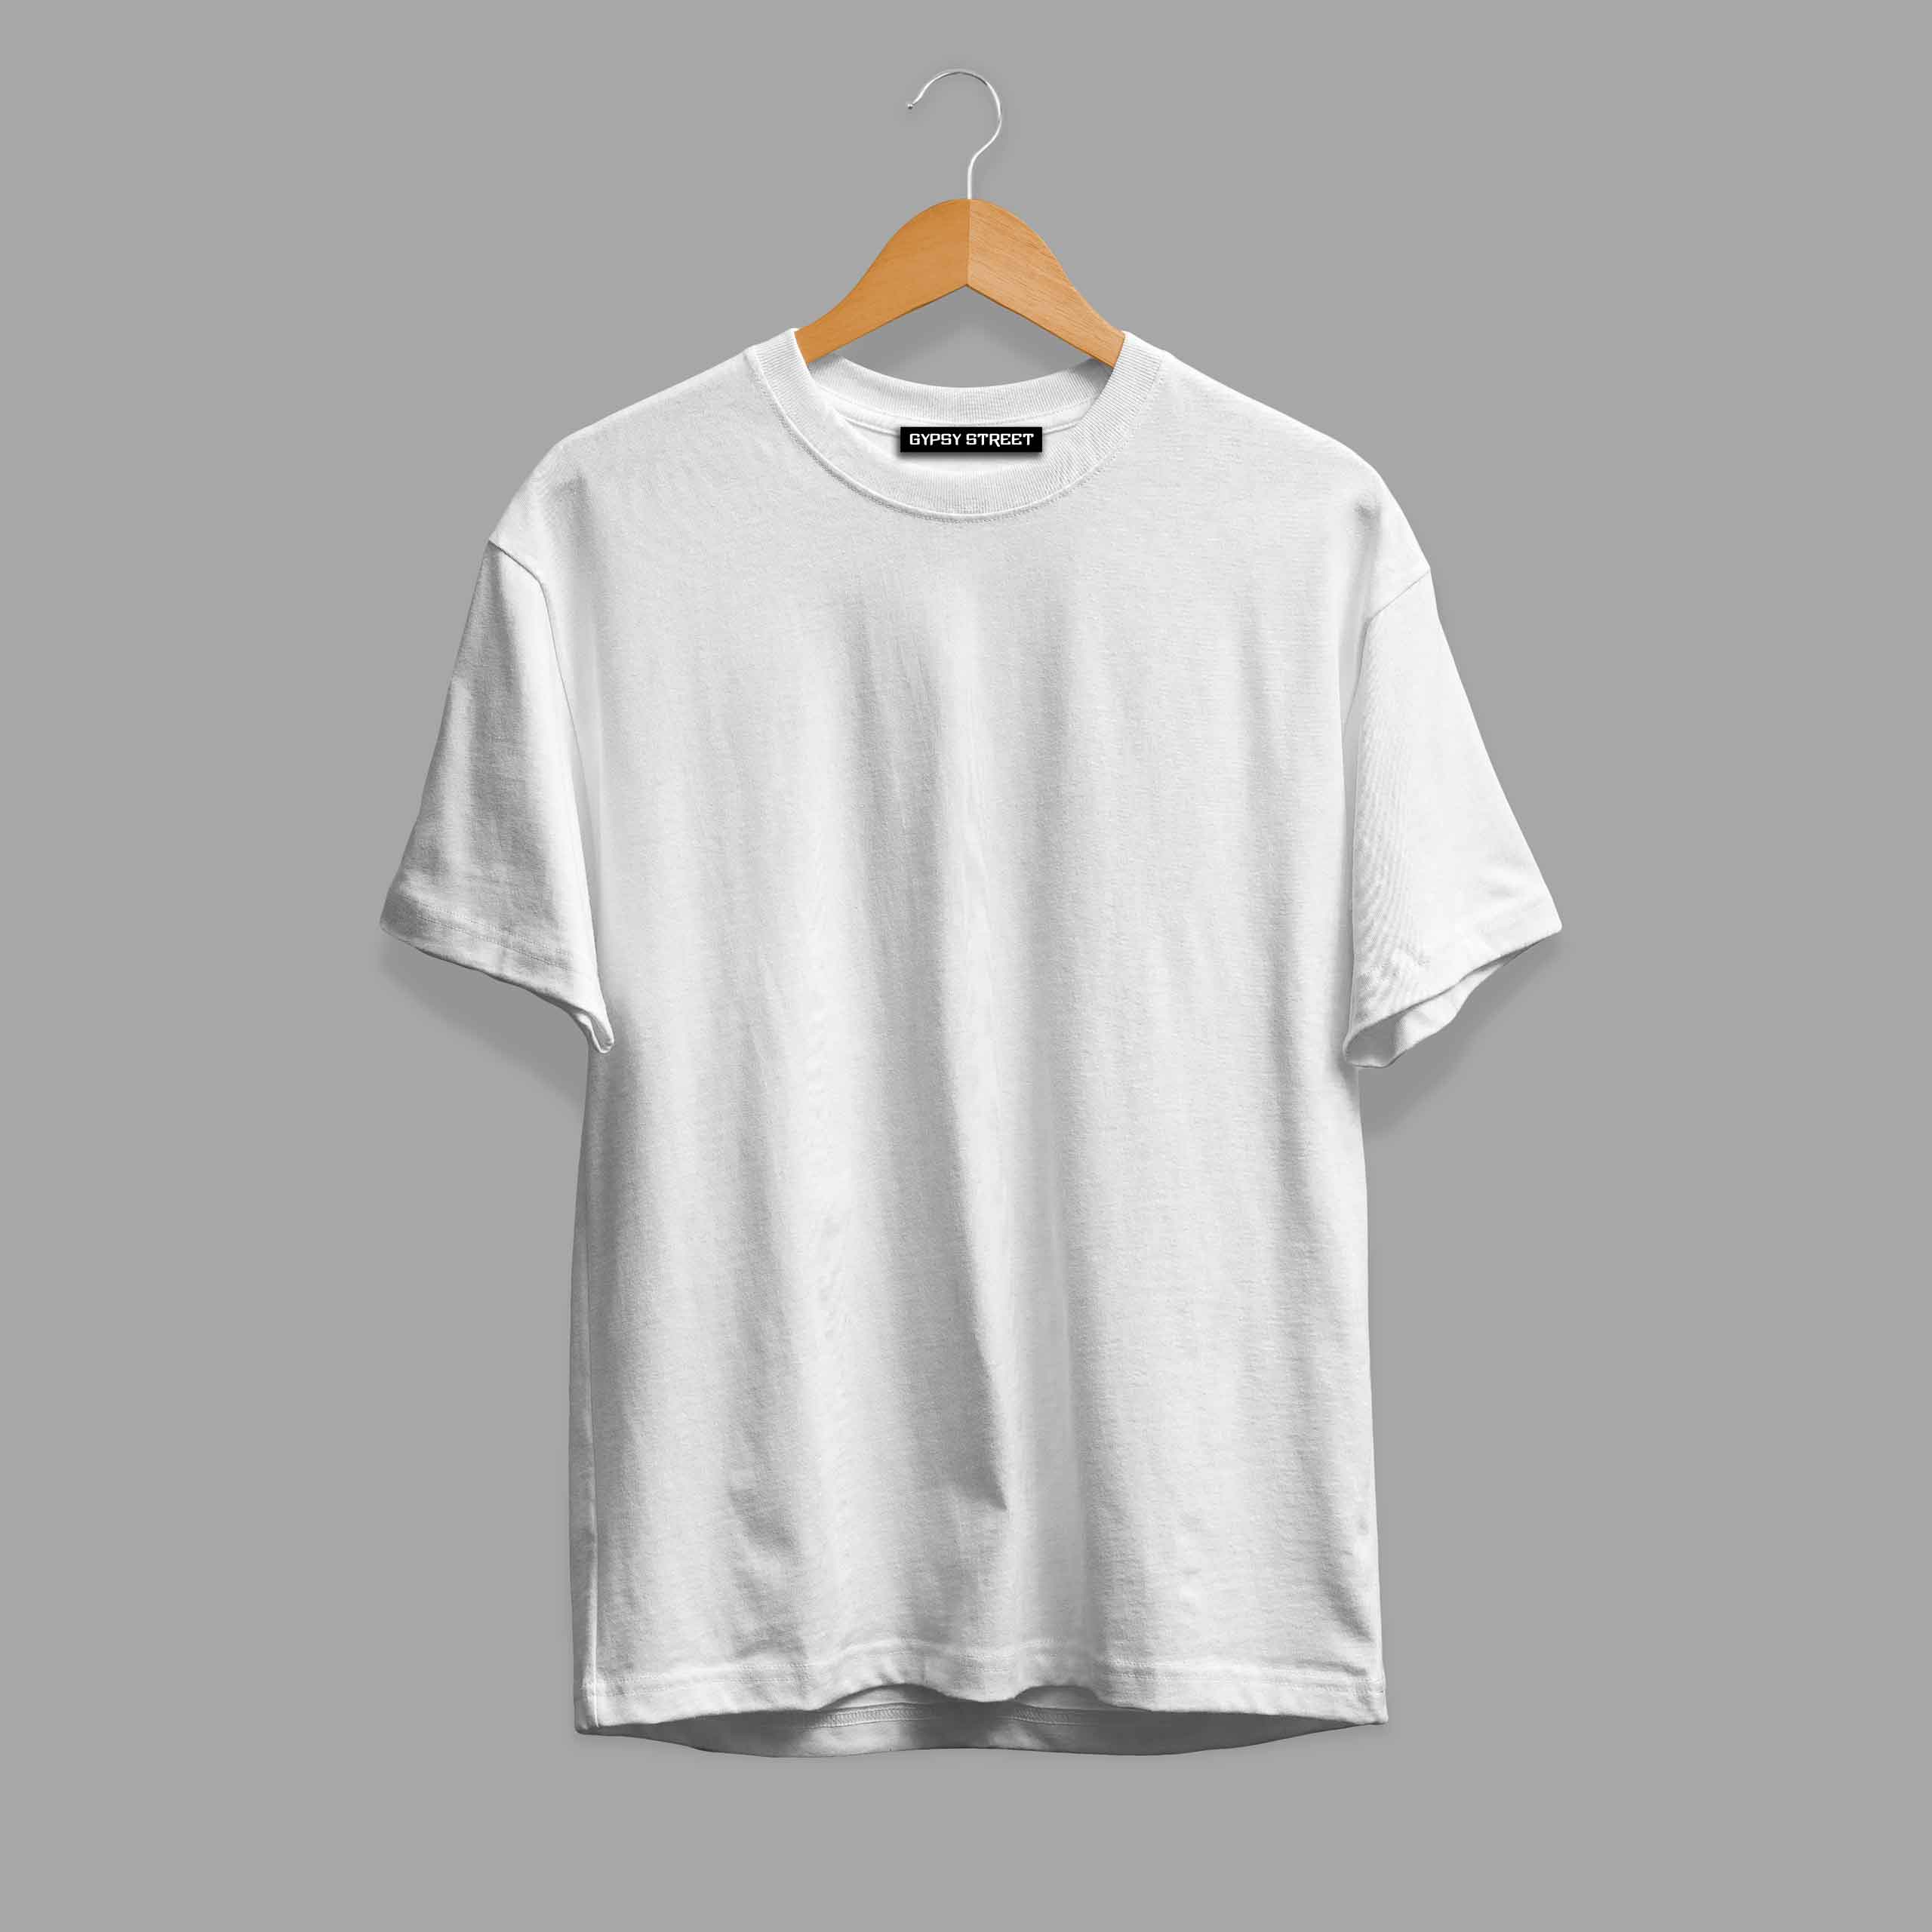 Frosty White T-Shirt Solid Collection For Men - Gypsy Street